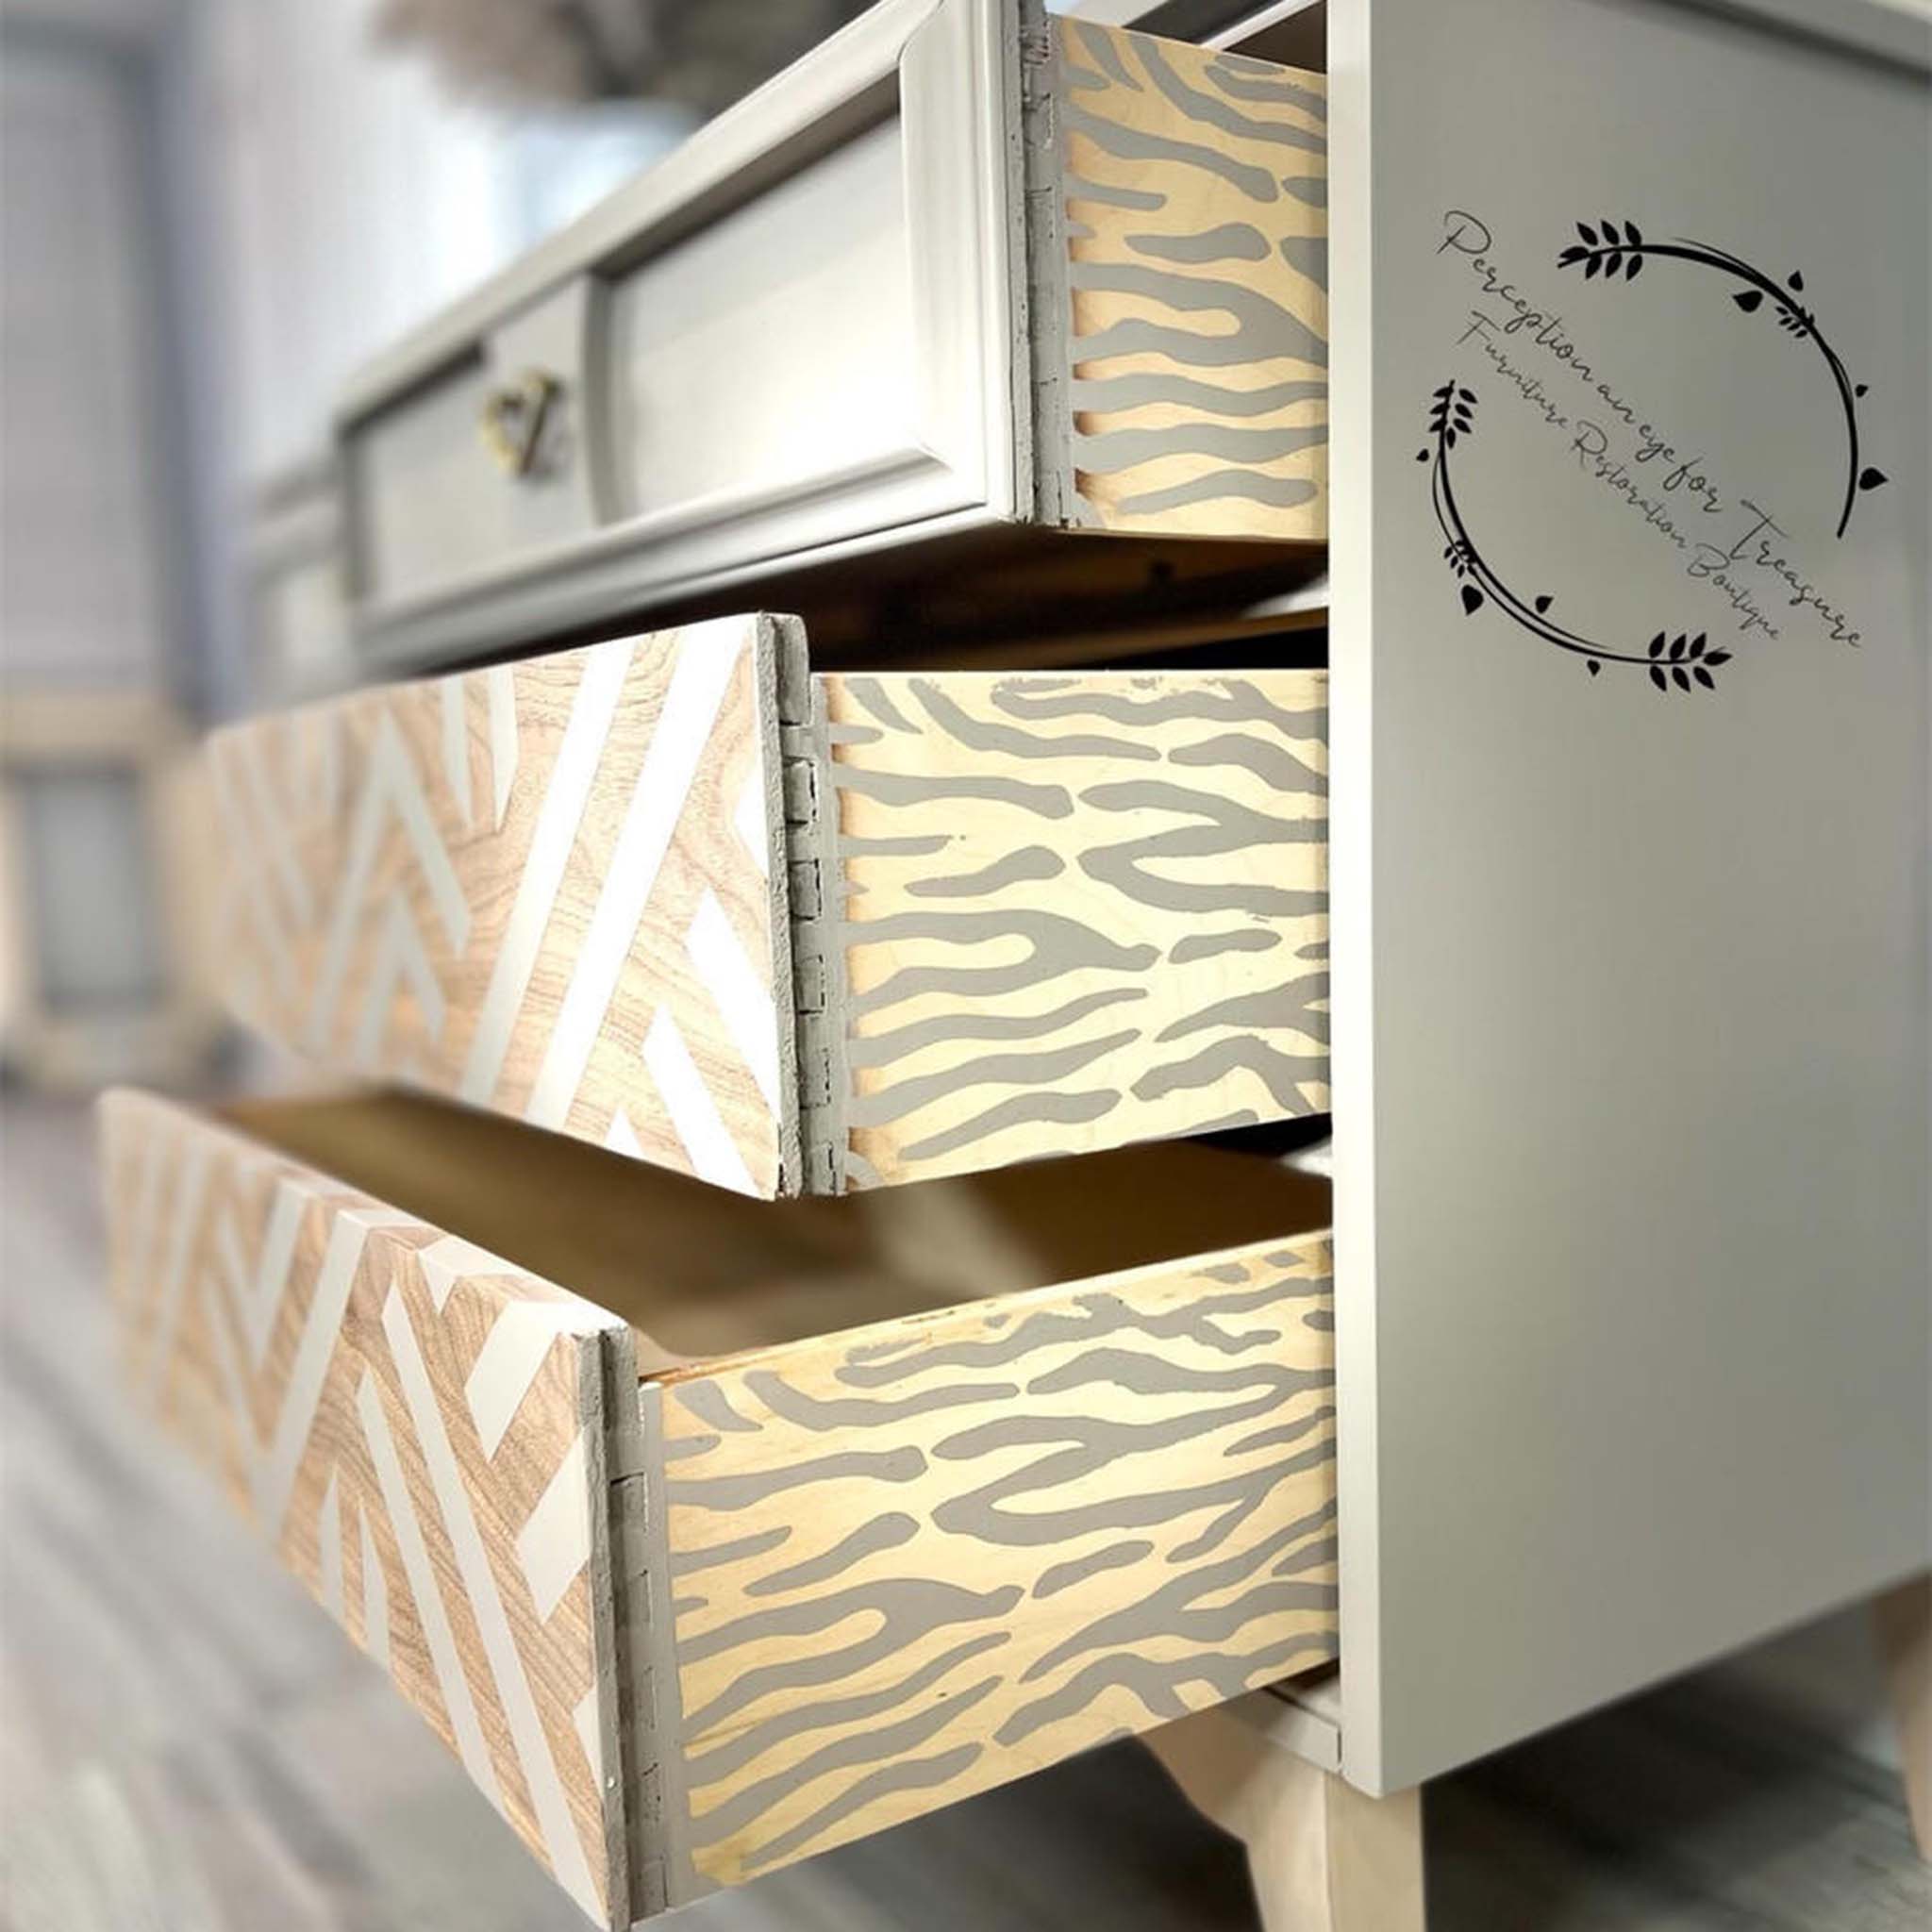 A dresser refurbished by Perception an eye for Treasure Furniture Restoration Boutique is painted beige and features Belles & Whistles Safari mylar stencil in beige against natural light wood on the sides of the drawers.